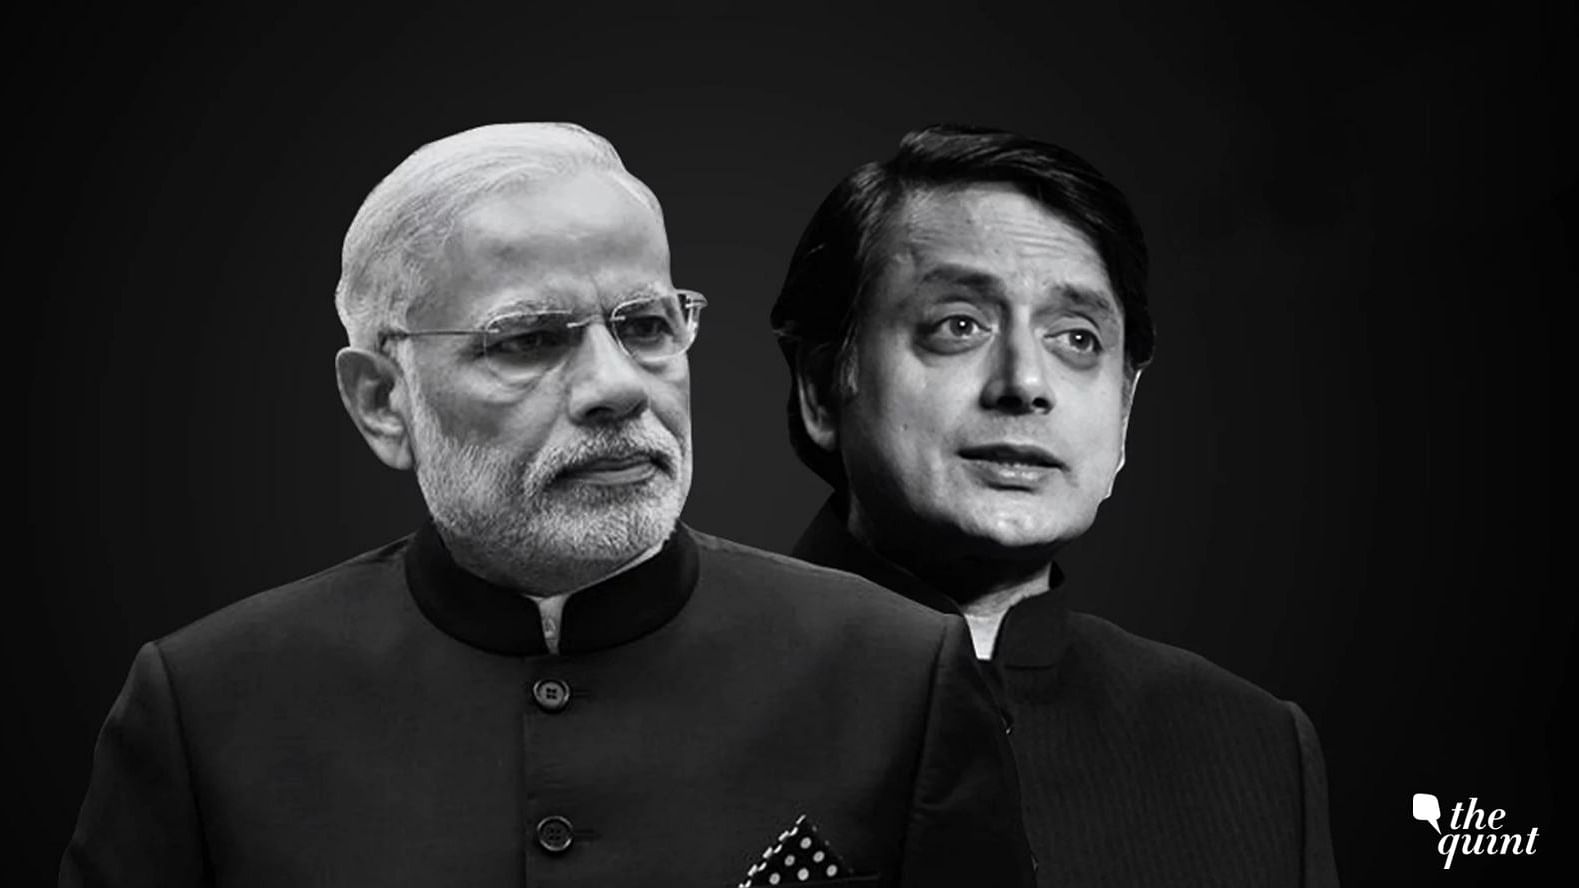 Tharoor said that the Opposition parties stand united with PM Modi on the Kashmir issue being raised at the United Nations.